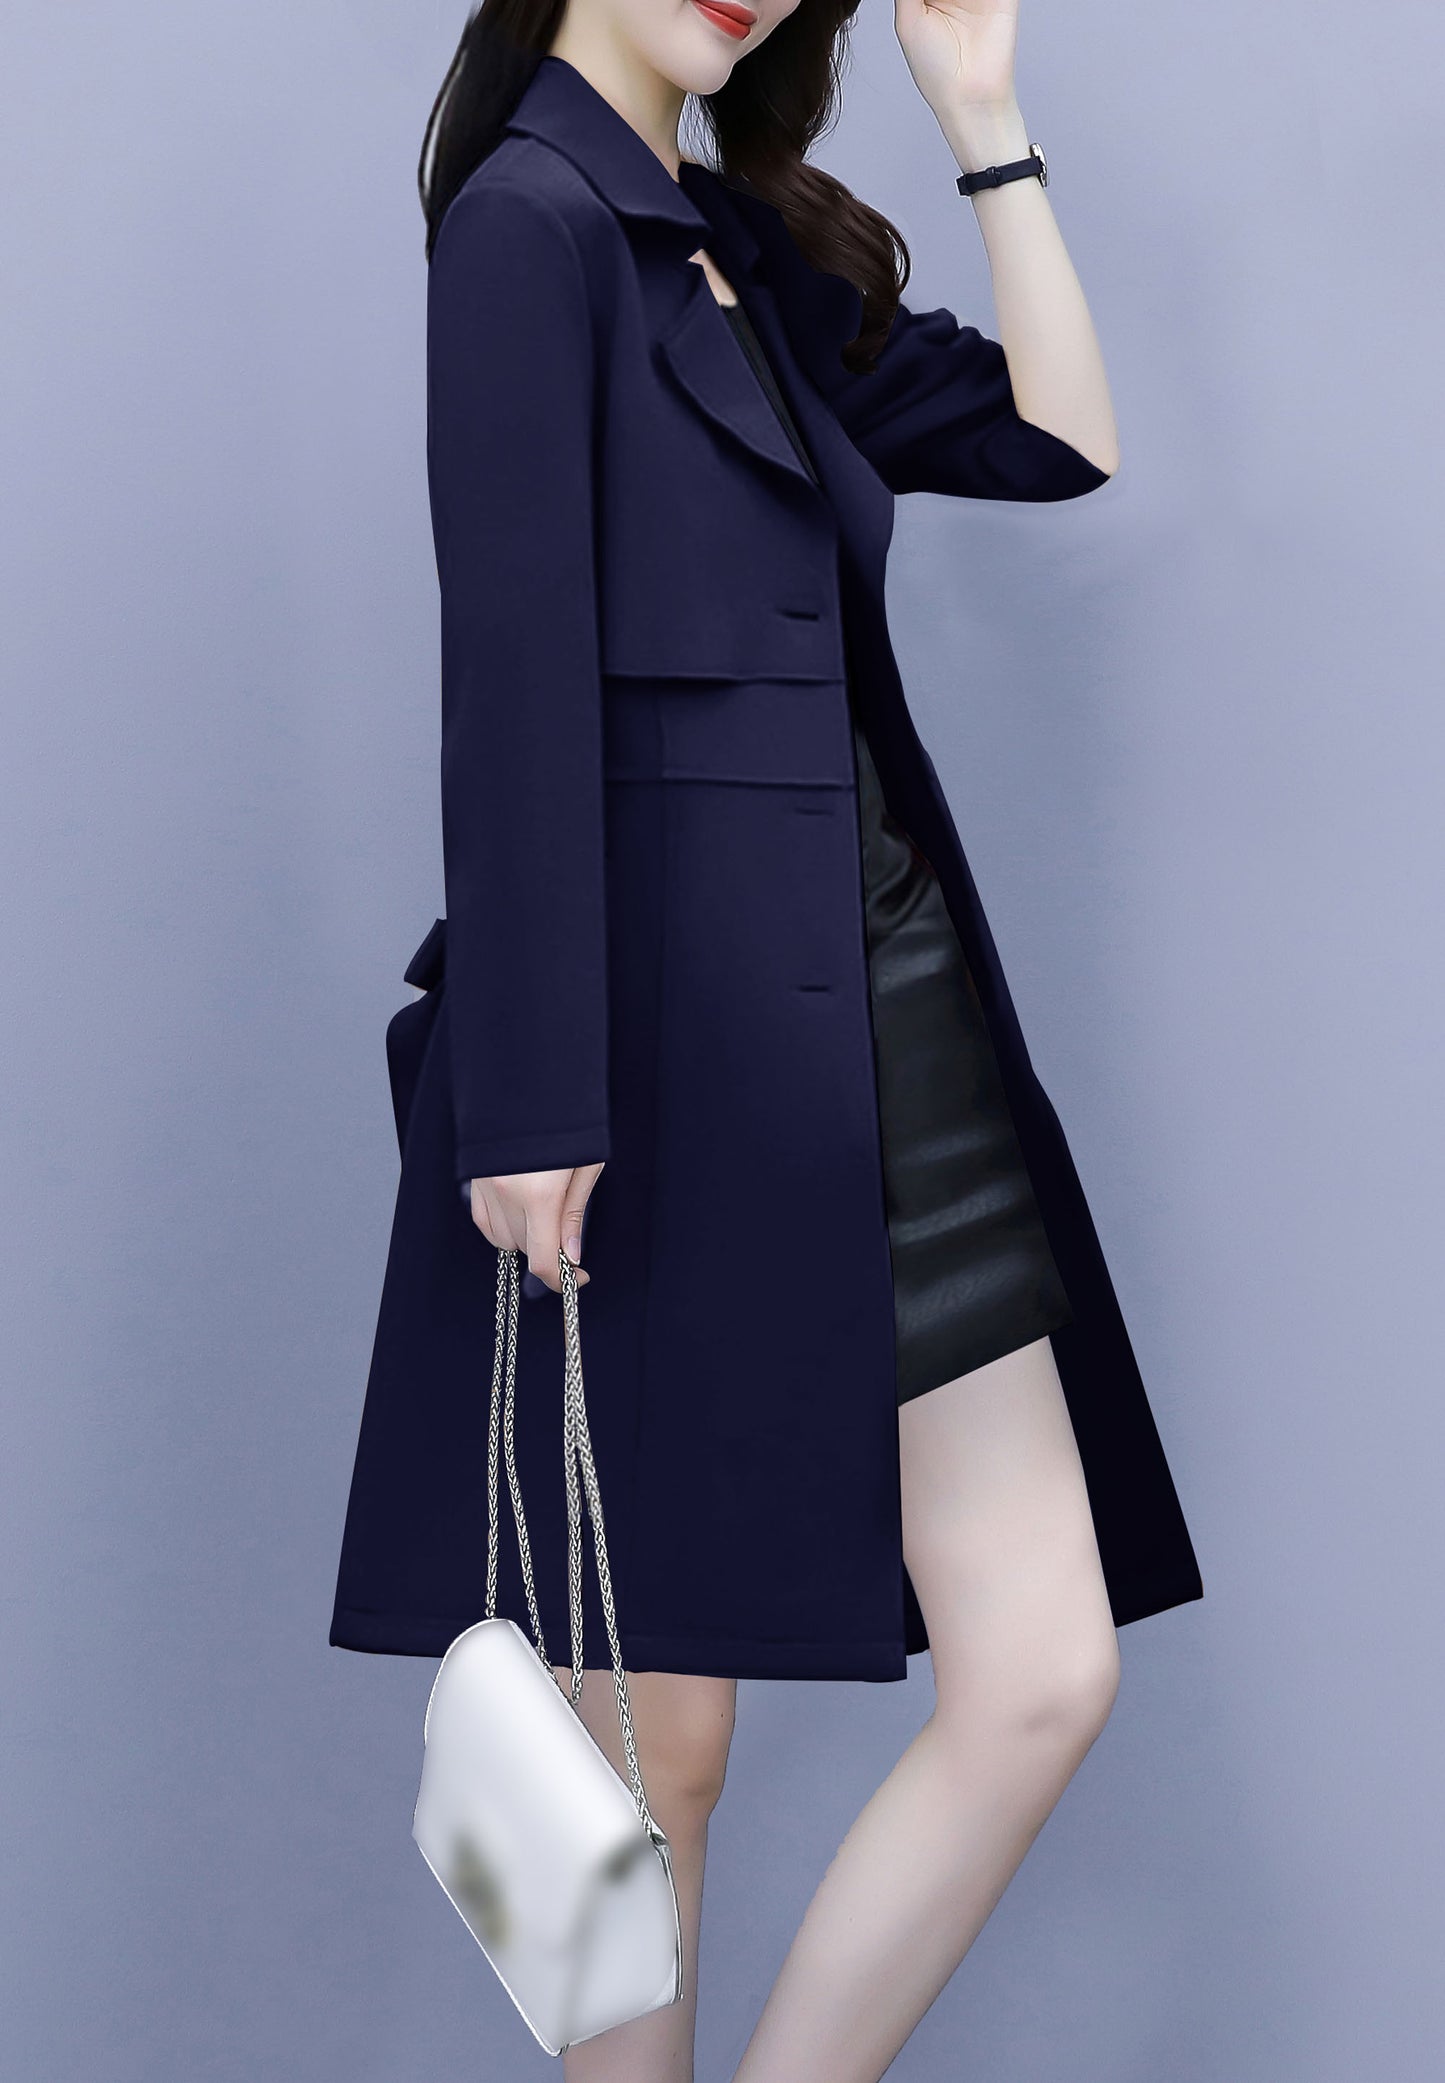 Navy Blue 3/4 Length Outerwear Trench Coat with Belt